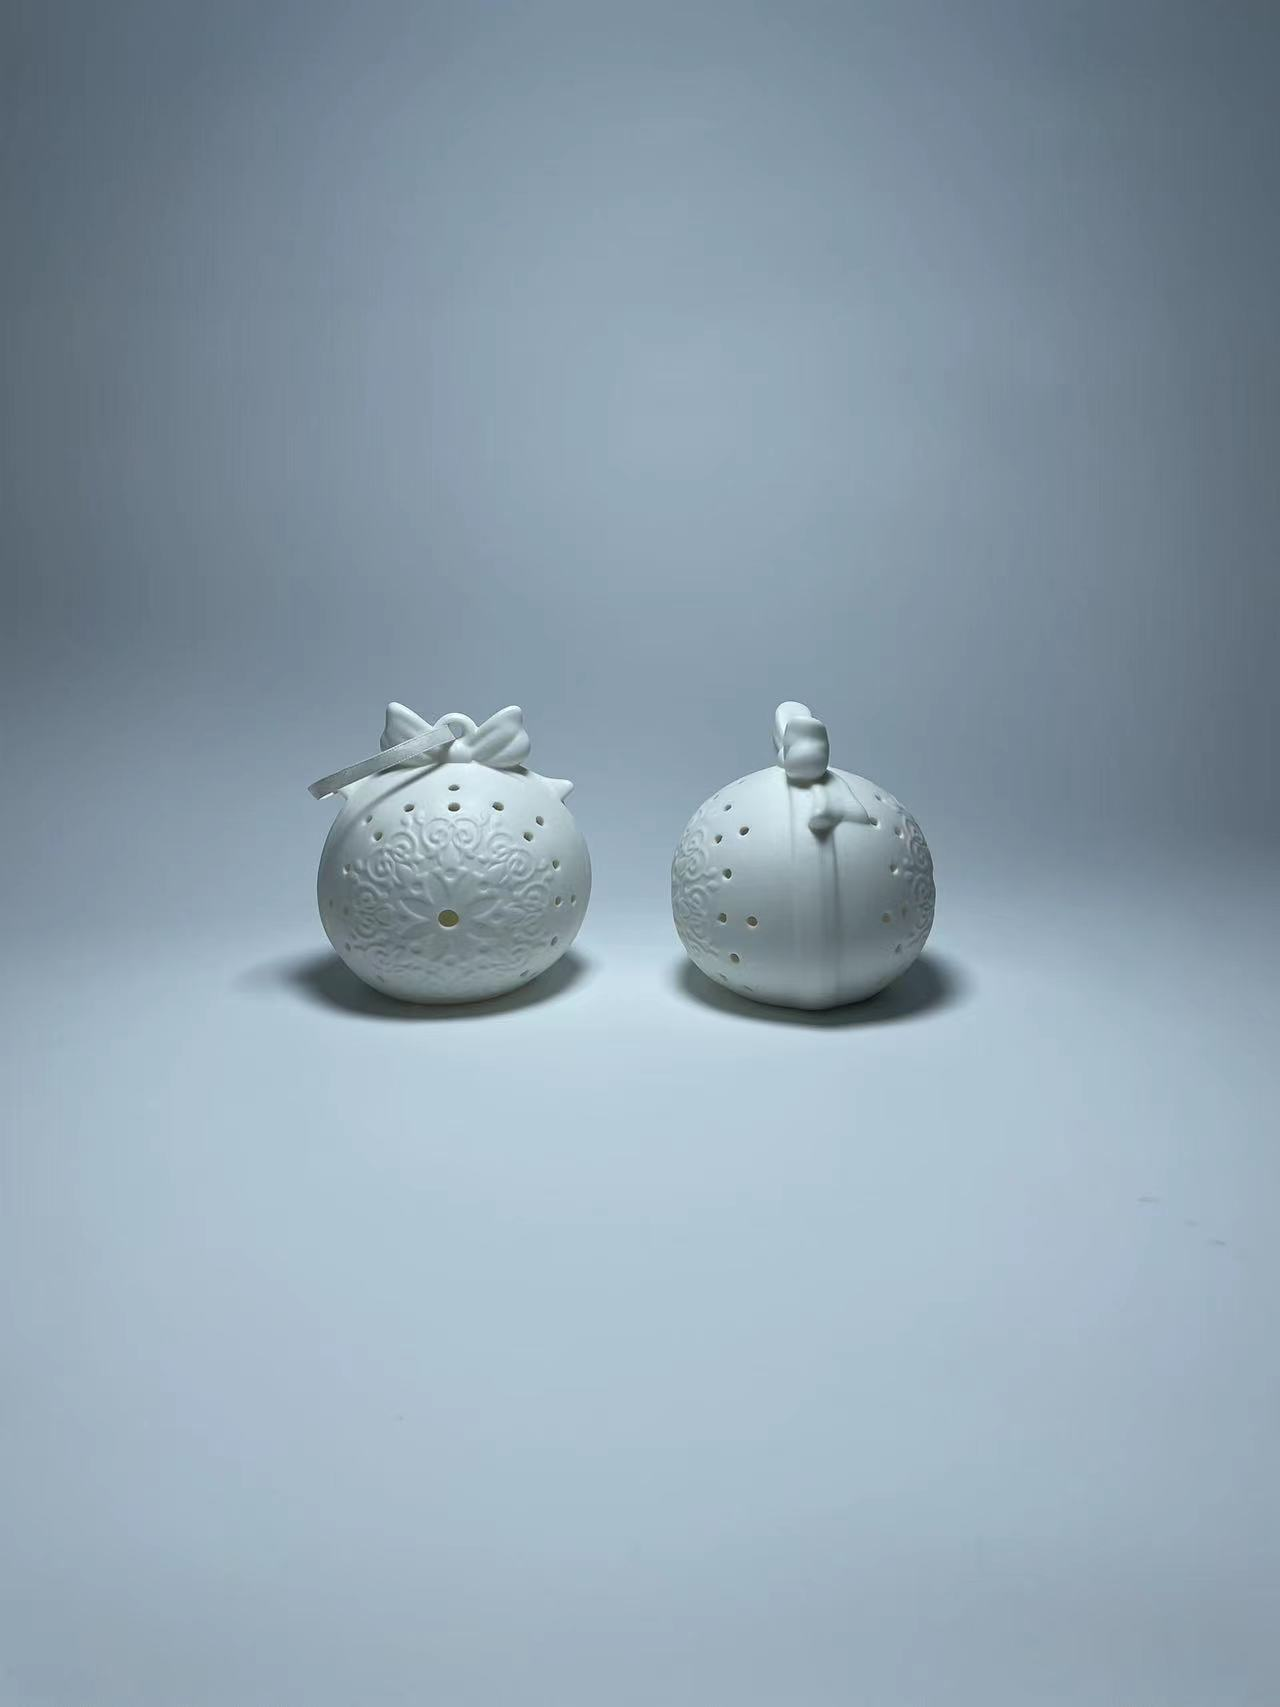 What are the types of ceramic handicrafts?